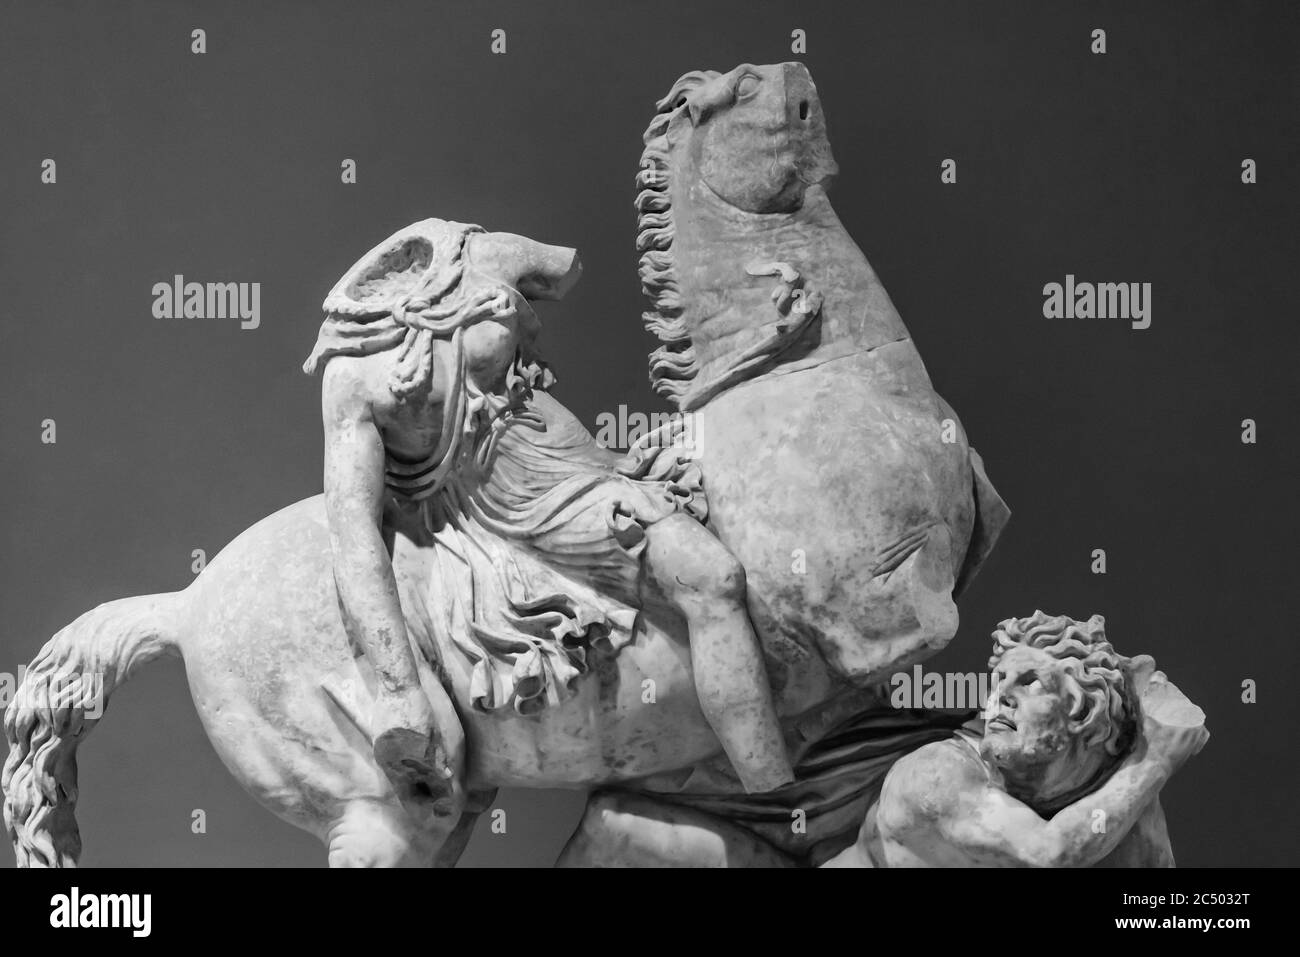 Black and white photo of ancient roman statues in ruins showing a headless soldier riding a horse against a man on the ground Stock Photo